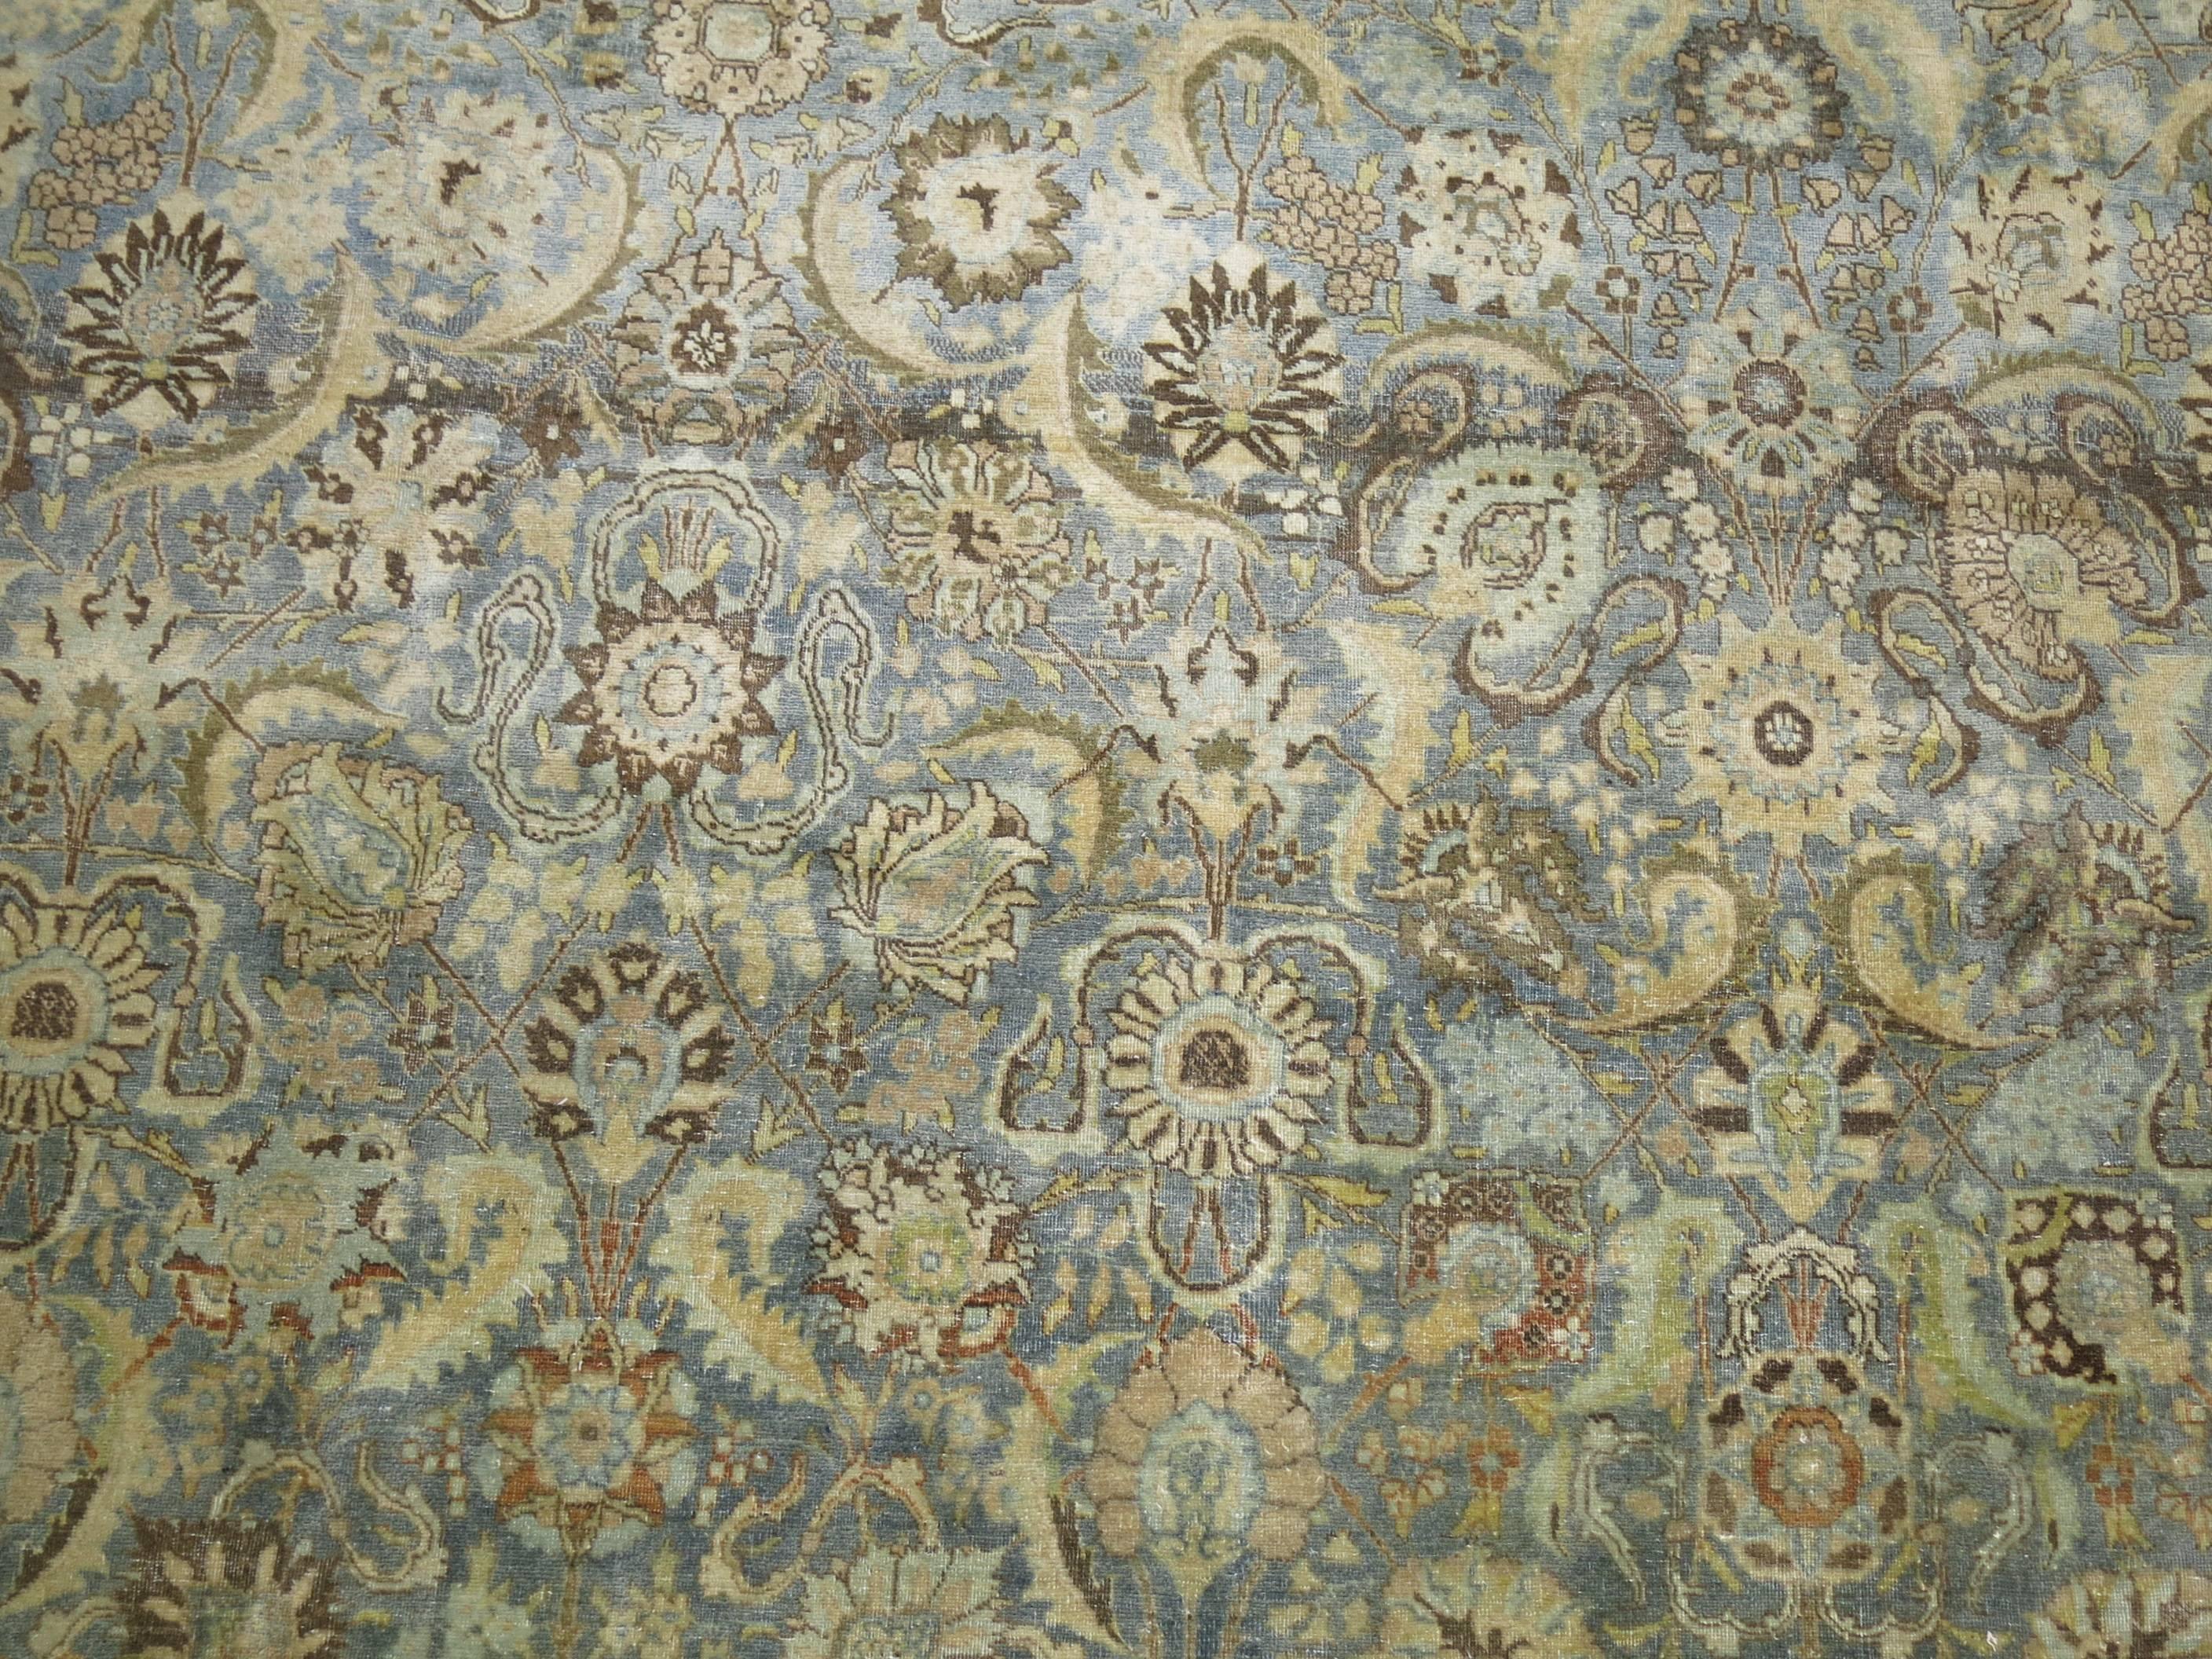 Stunning Persian Tabriz rug in soft blues and grey. The all-over palette has some lovely sand and brown accents.